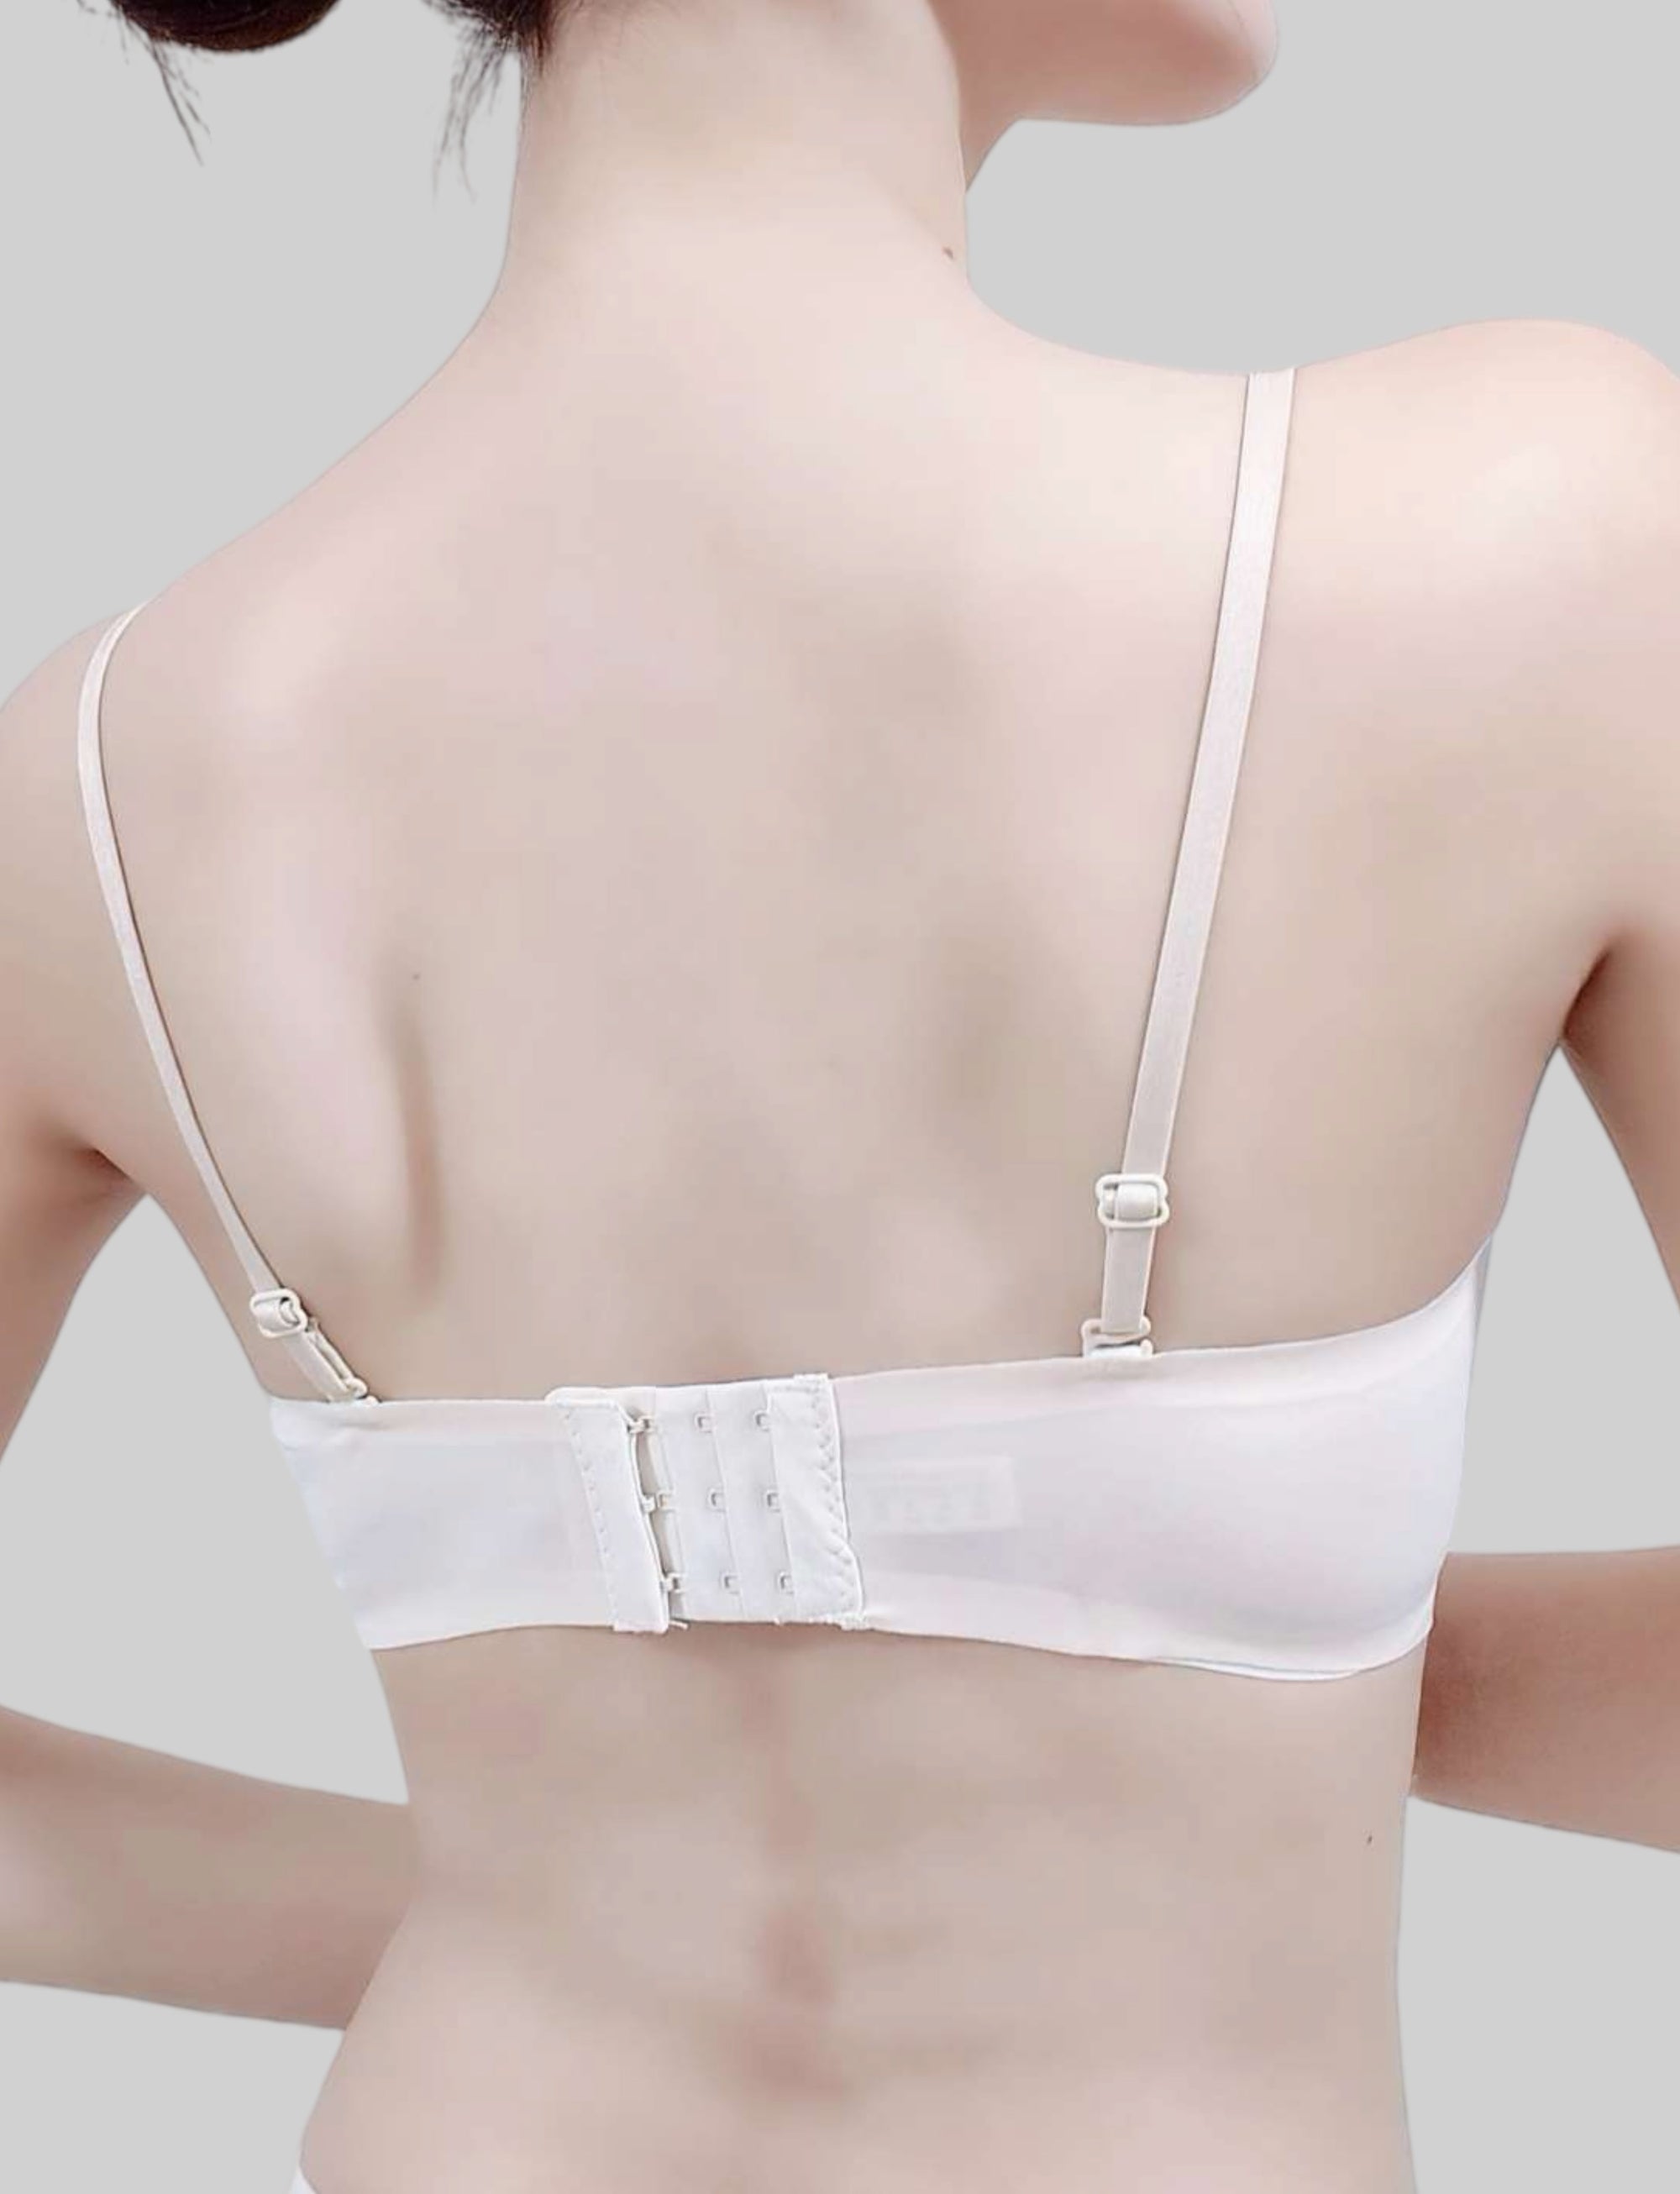 The New Style Seamless Bandeau Bra (No Panties) that Stays in Place No Matter How You Move